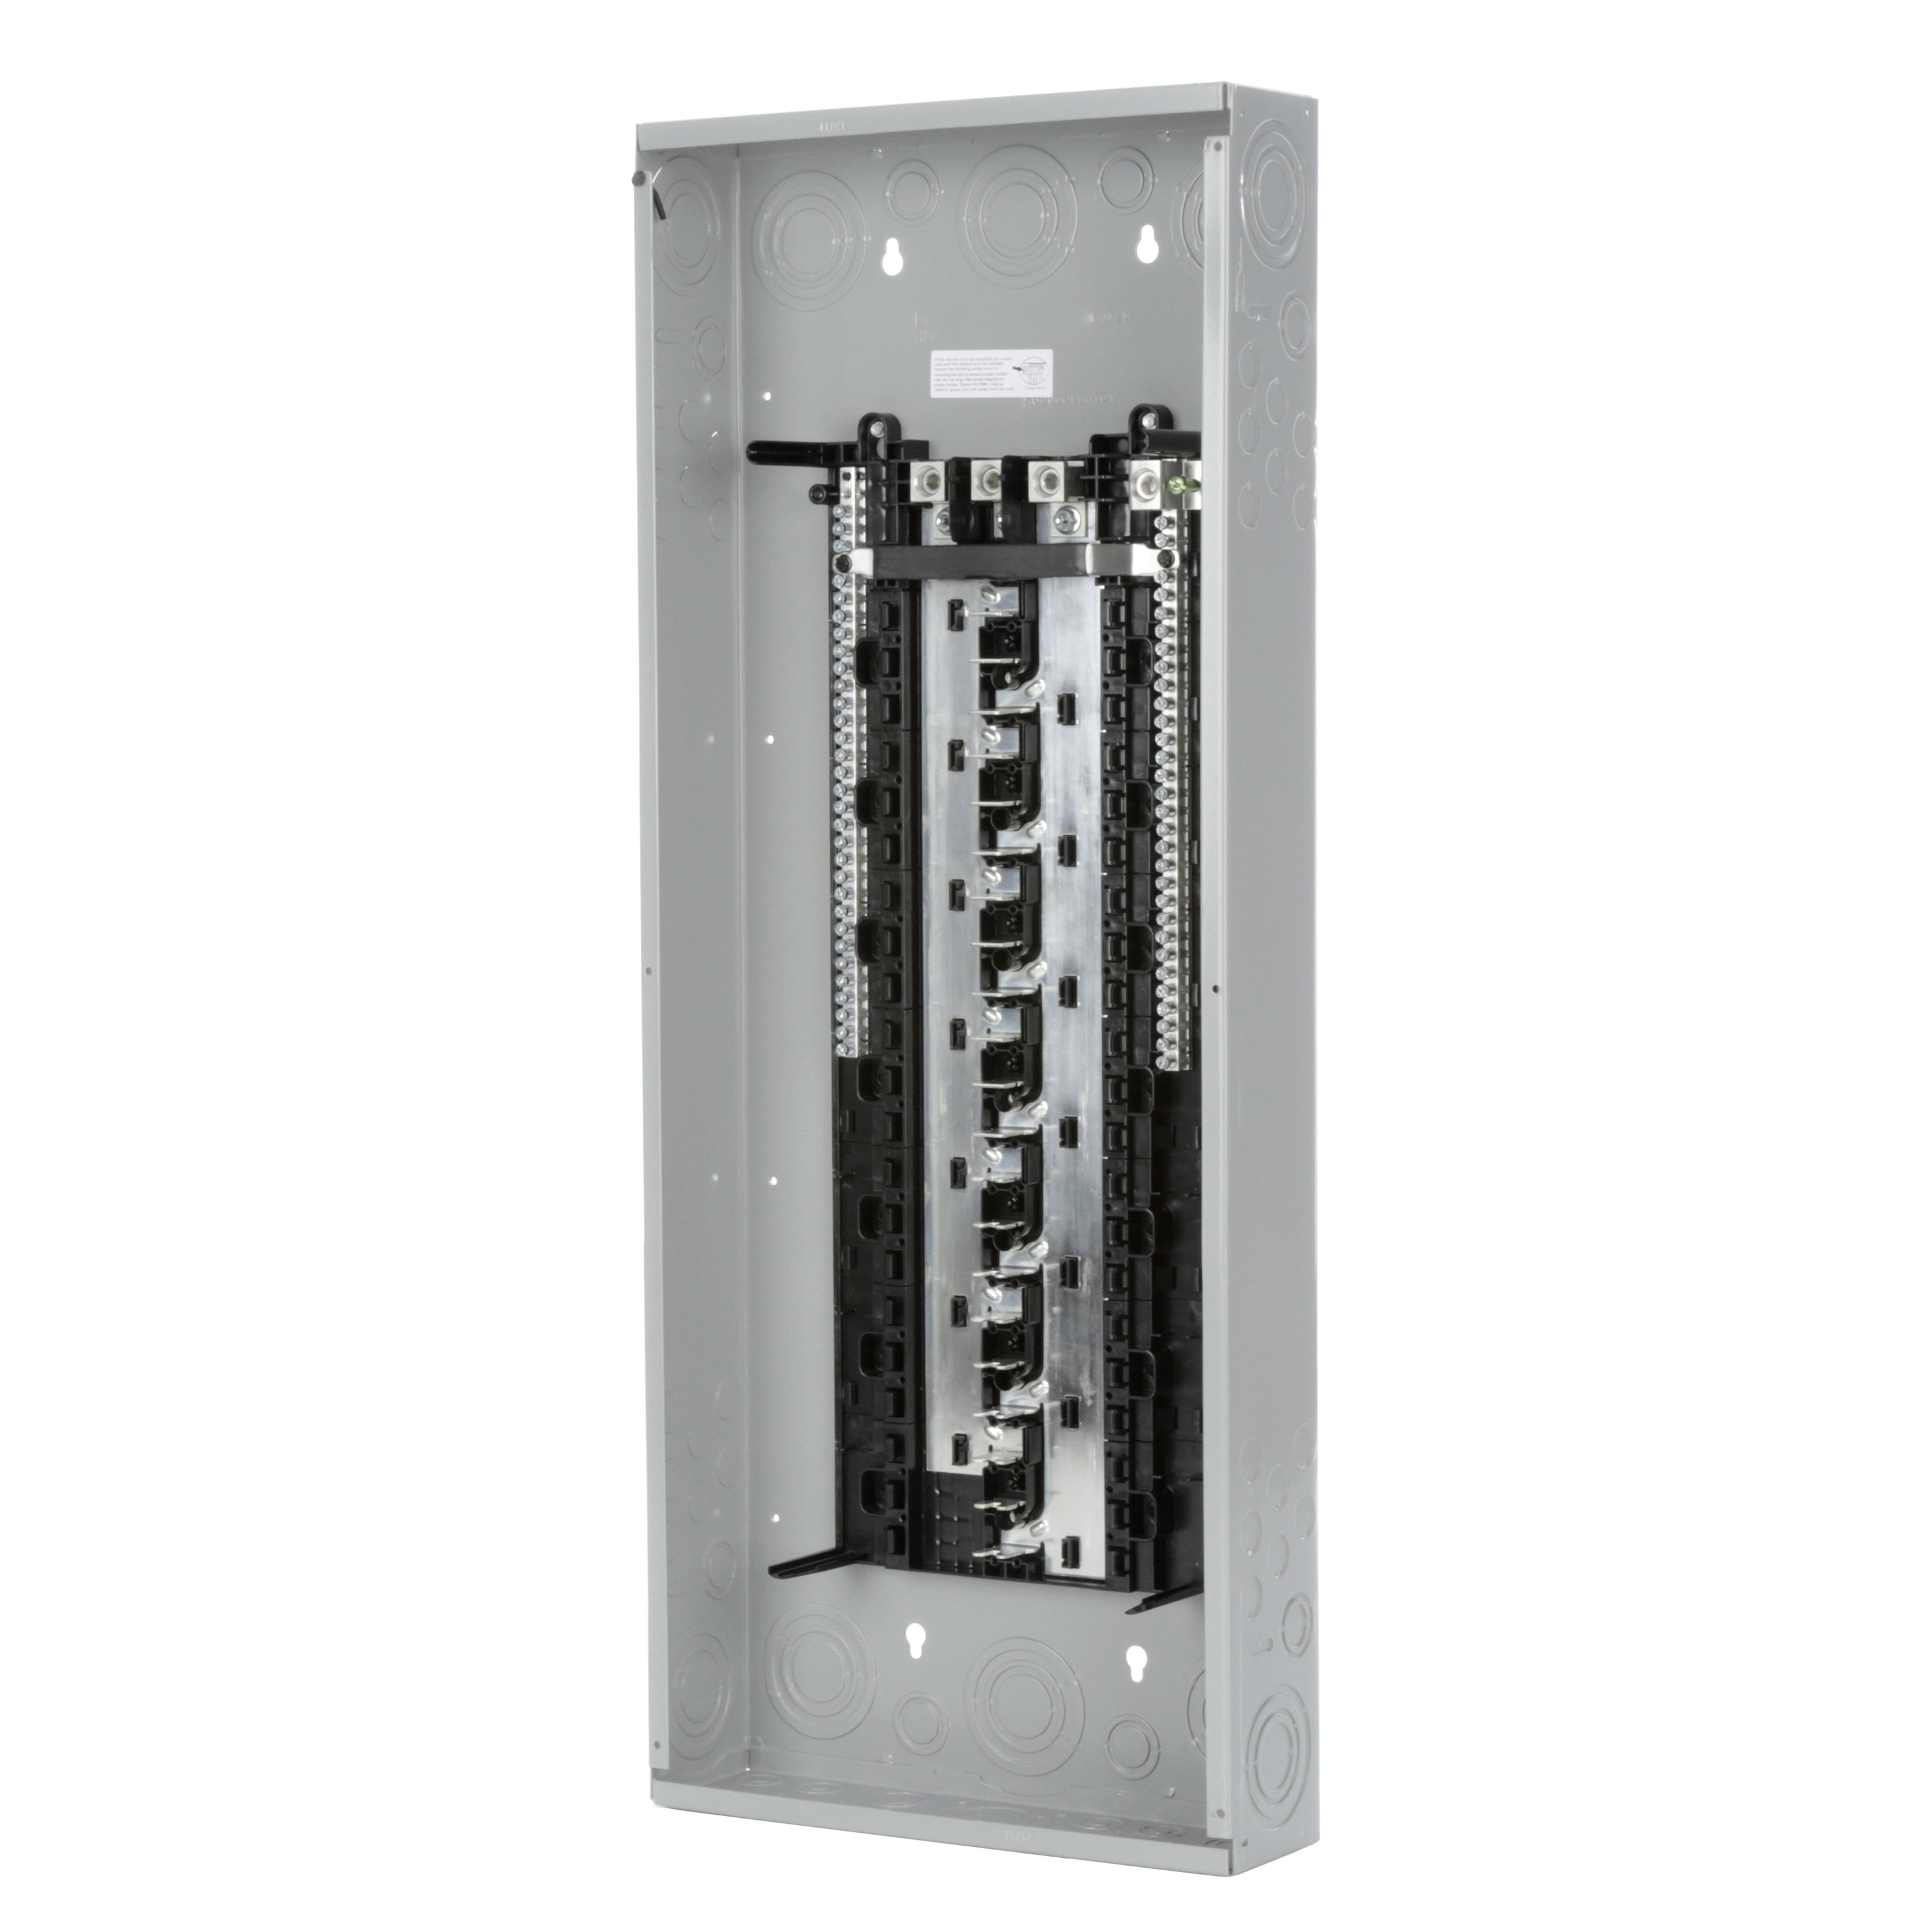 SIEMENS LOW VOLTAGE ES SERIES LOAD CENTER. MAIN LUG WITH 42 1-INCH SPACES ALLOWING MAX 60 CIRCUITS. 3-PHASE 4-WIRE SYSTEM RATED 120/240V OR 120/208V (225A) 100KA INTERRUPT. SPECIAL FEATURES ALUMINUM BUS, GRAY TRIM, NEMA TYPE1 ENCLOSURE FORINDOOR USE.